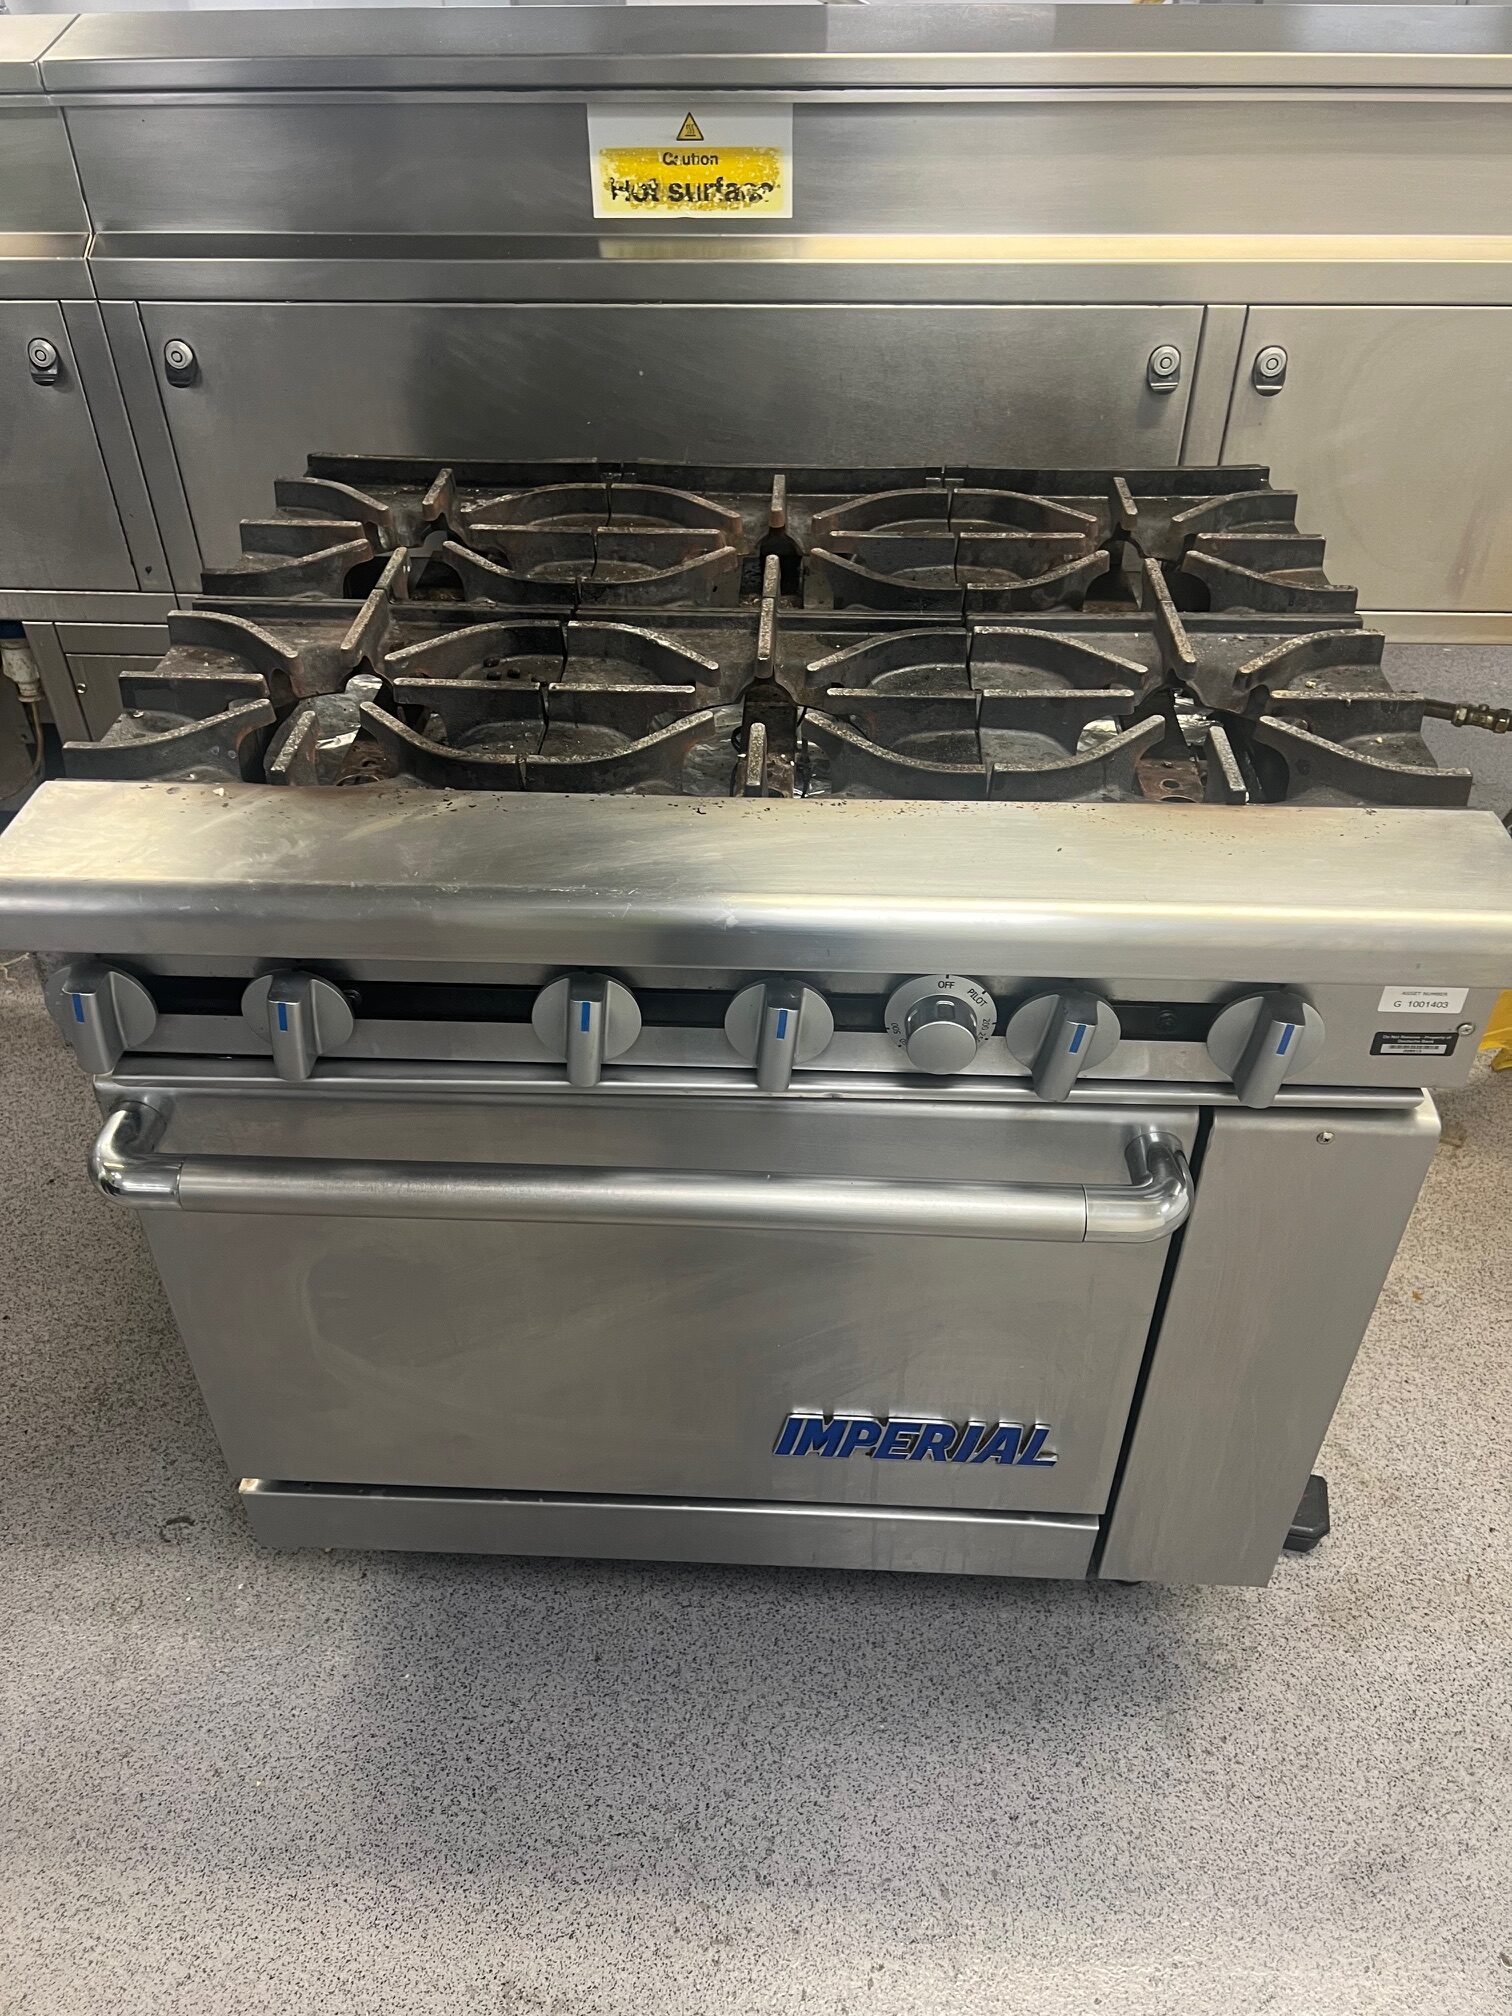 IMPERIAL IR6 6 Burner Range with Oven.